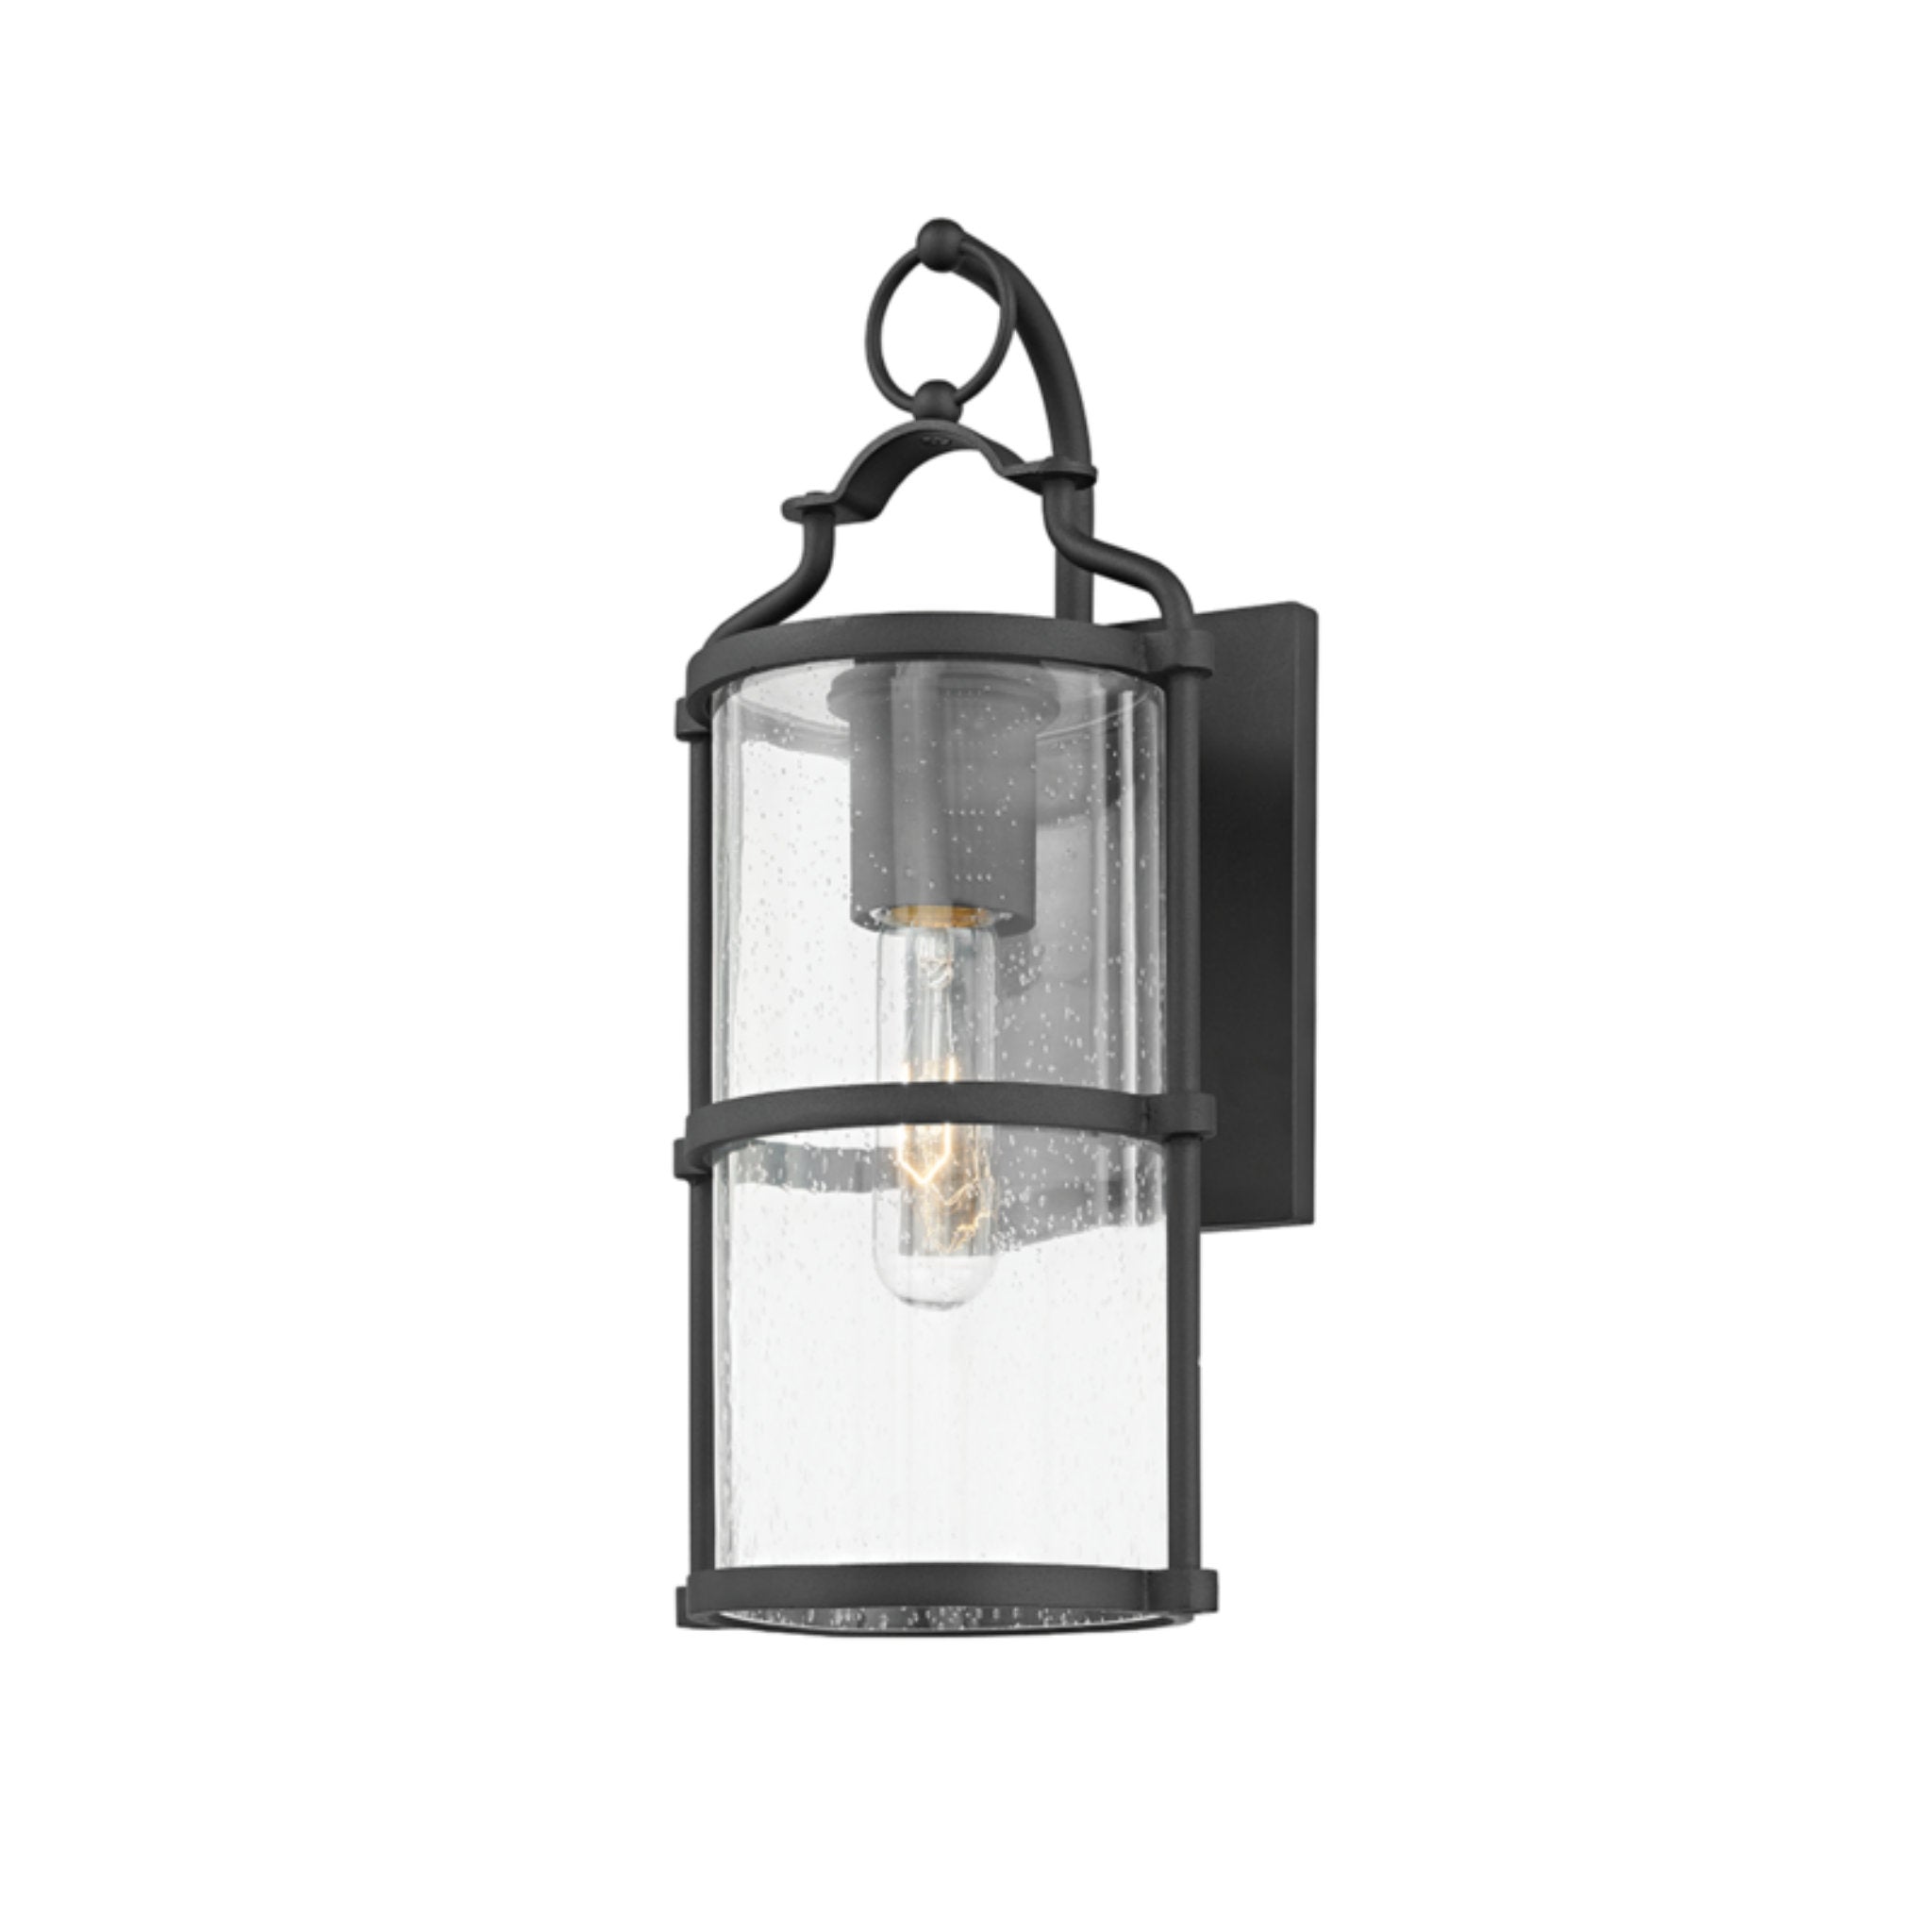 Burbank 1 Light Wall Sconce in Textured Black